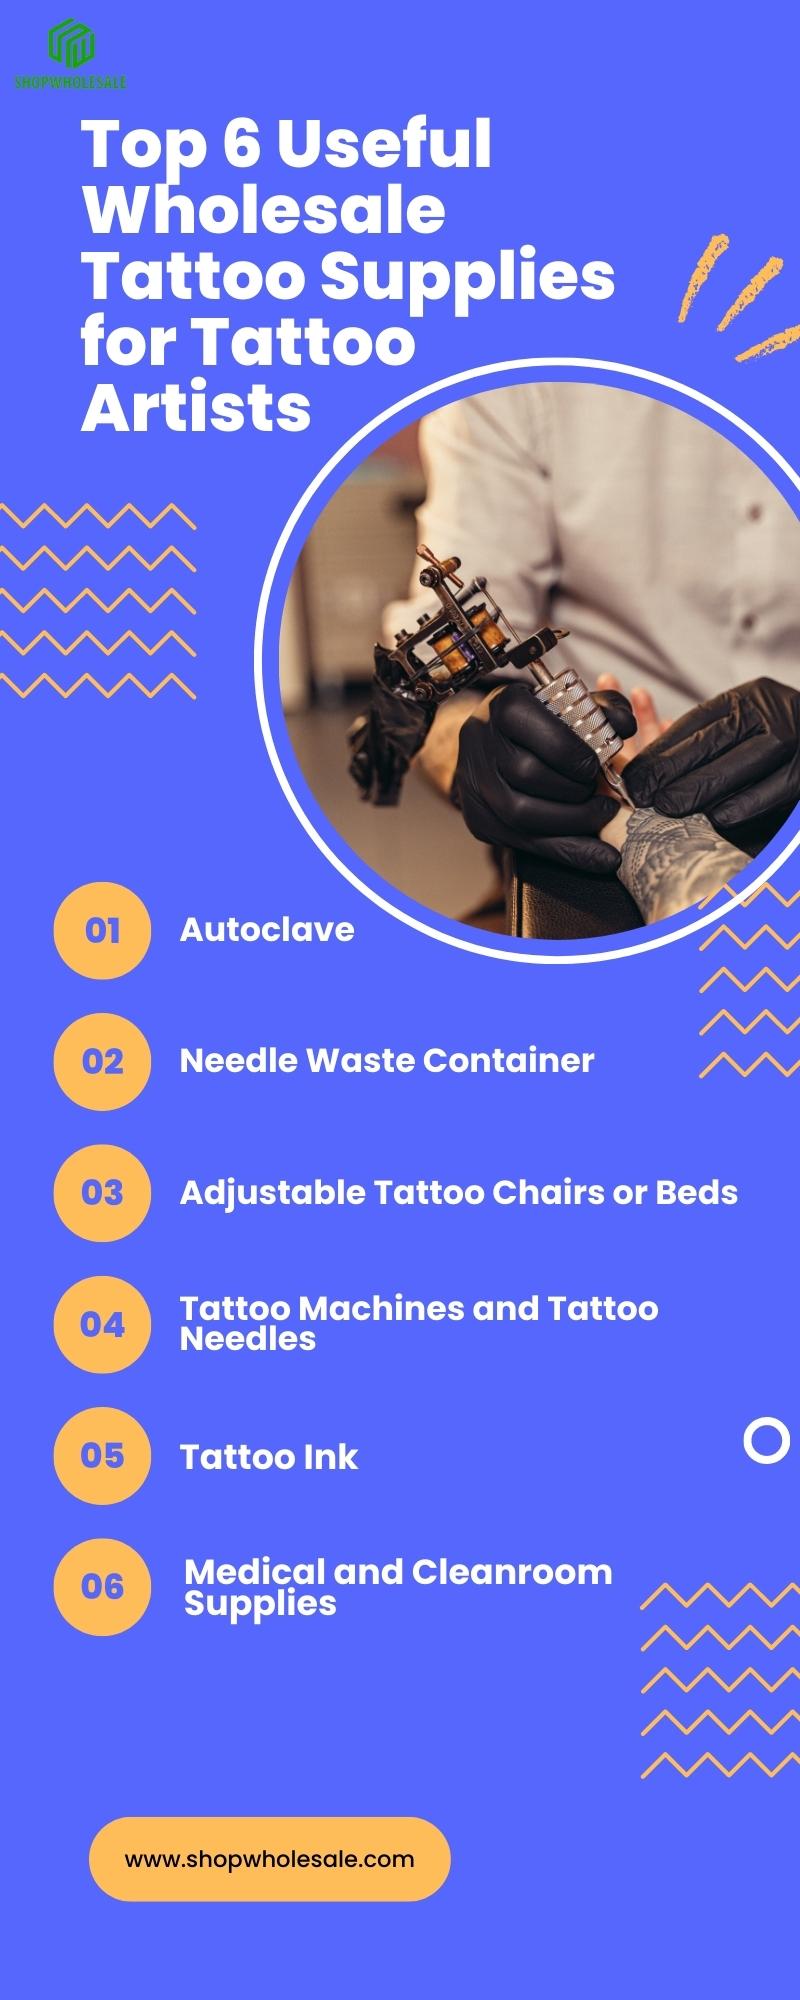 Top 6 Useful Wholesale Tattoo Supplies for Tattoo Artists